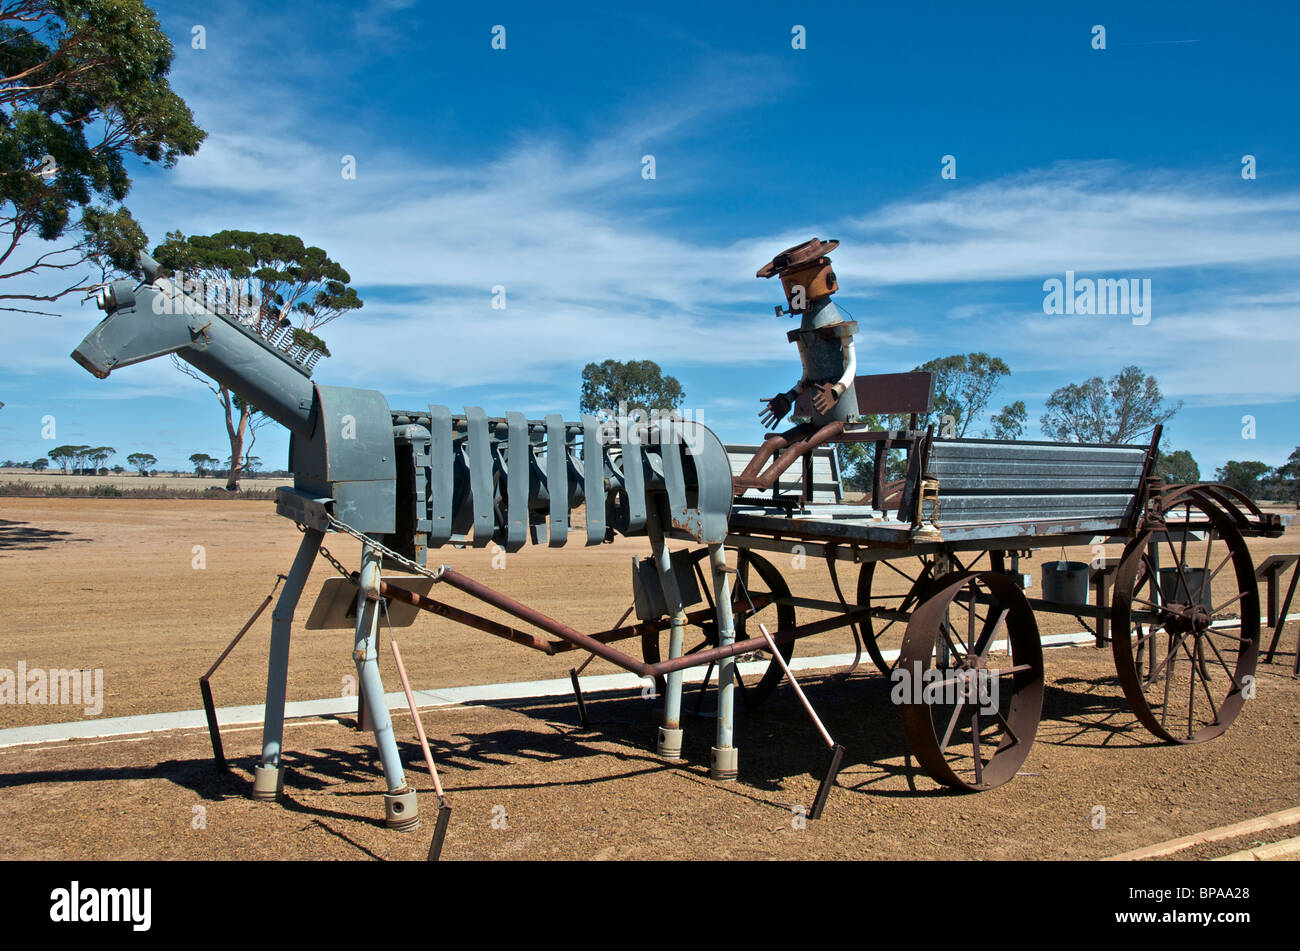 Horse drive and cart installation art from metal car parts Hyden Western Australia Stock Photo